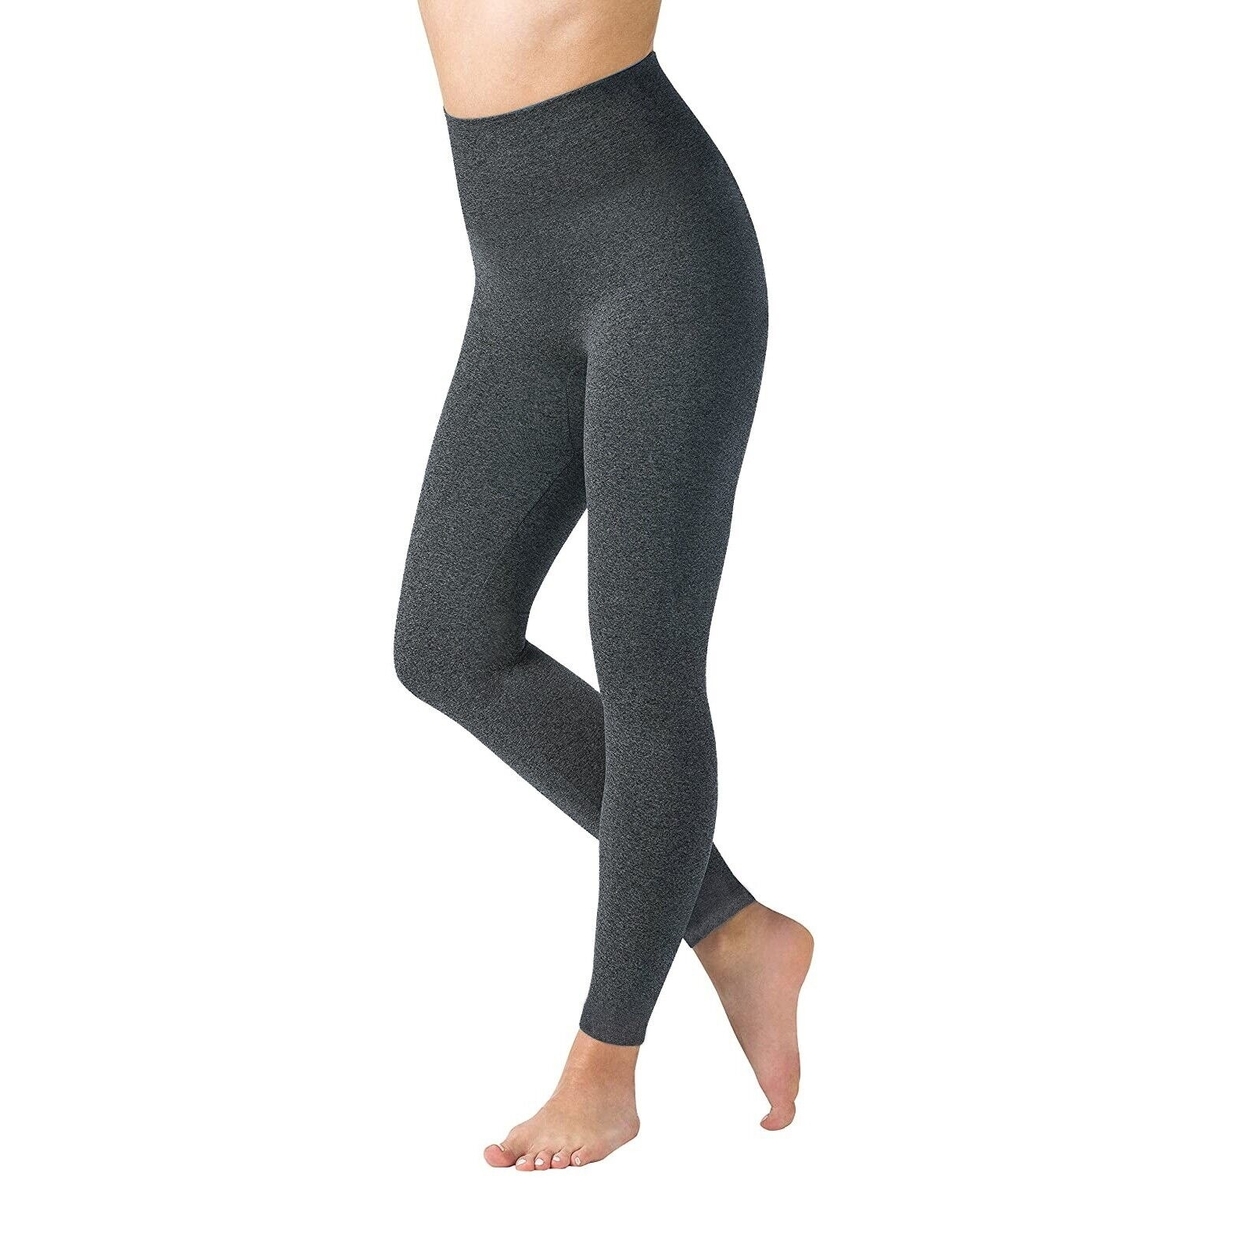 Women's Winter Warm Marled High Waist Fleece Lined Thick Thermal Leggings Pants - Charcoal, Small